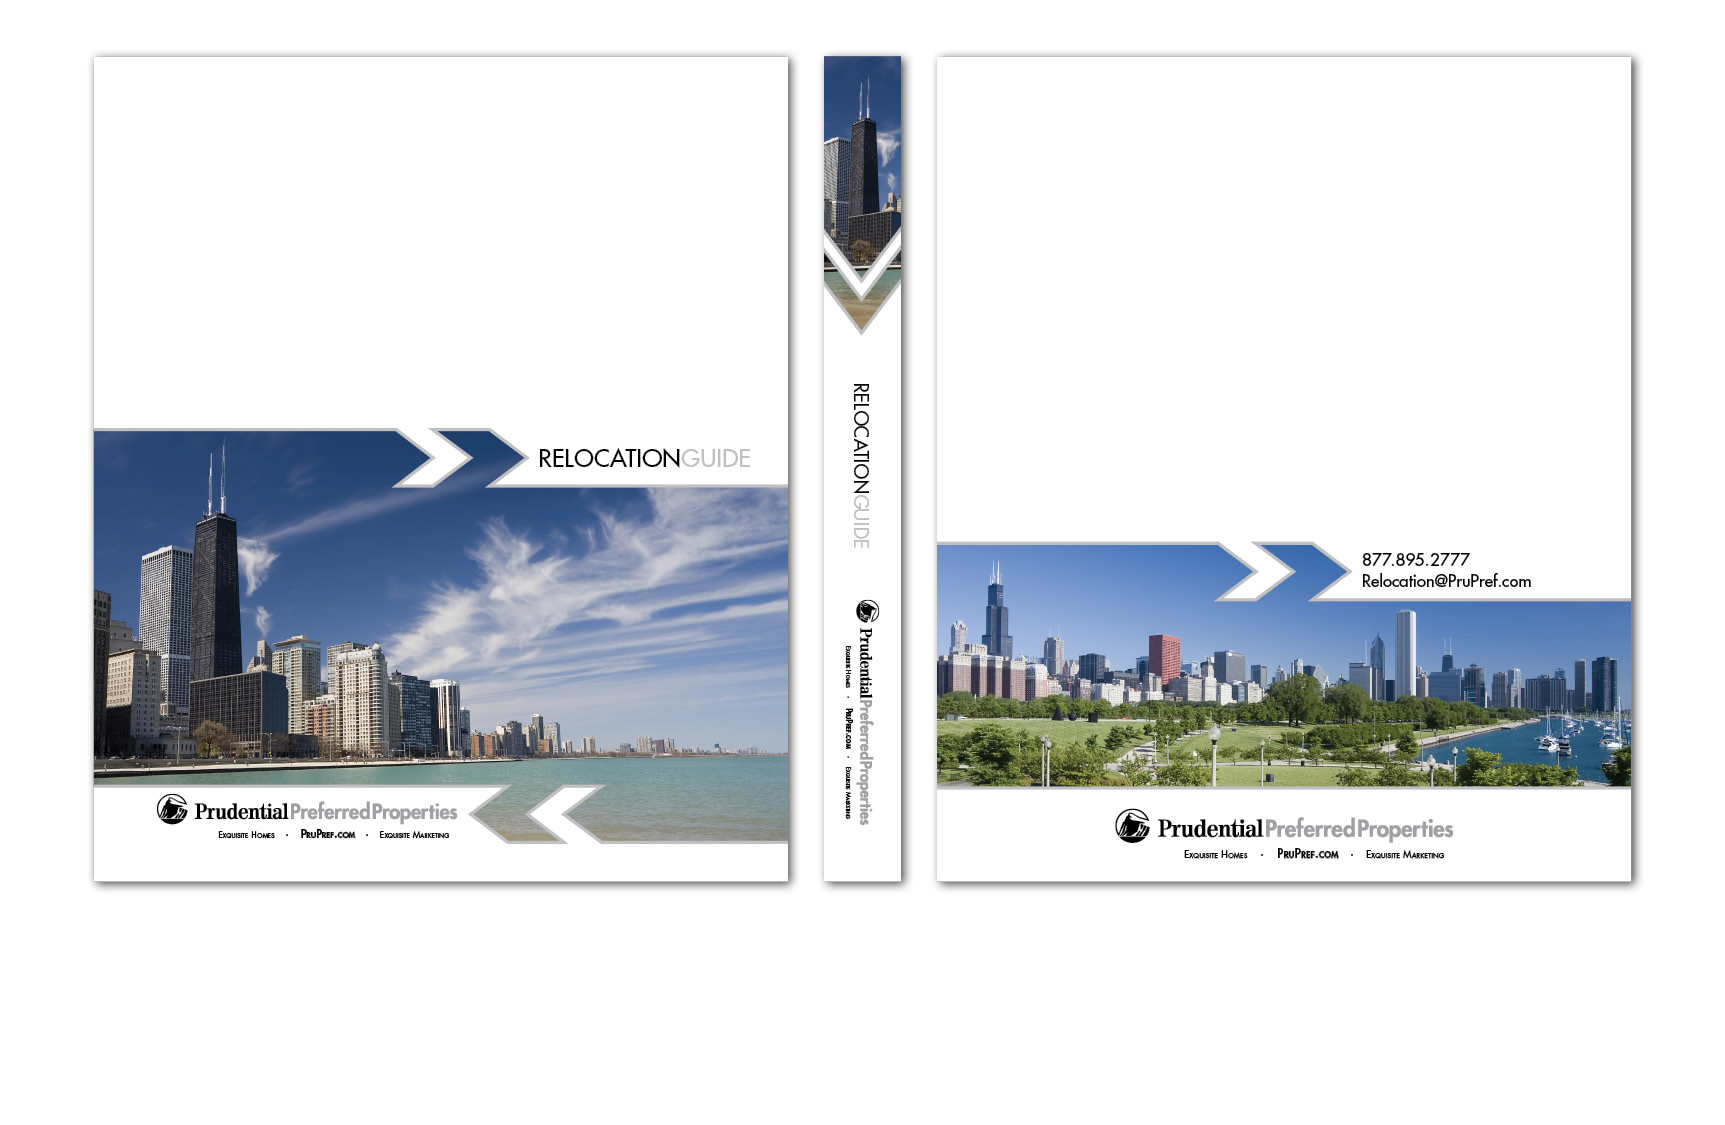  Relocation Guide for Prudential Preferred Properties in Chicago area. It was presented to people being relocated to the area by their employers. 